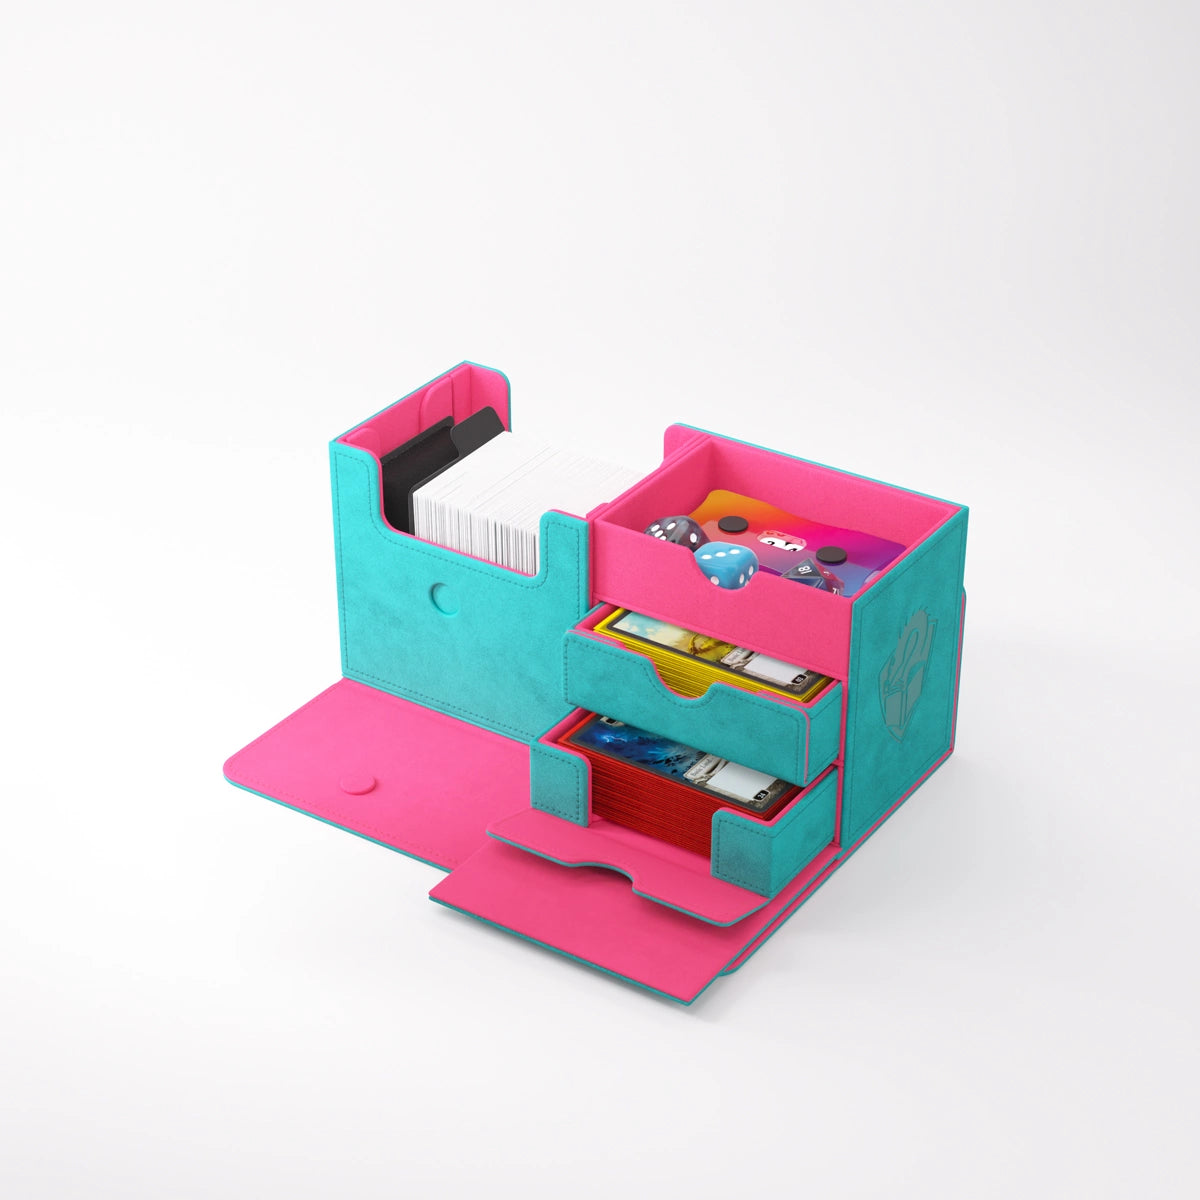 Gamegenic - Deck Box - The Academic - XL Pink/Teal (133+)